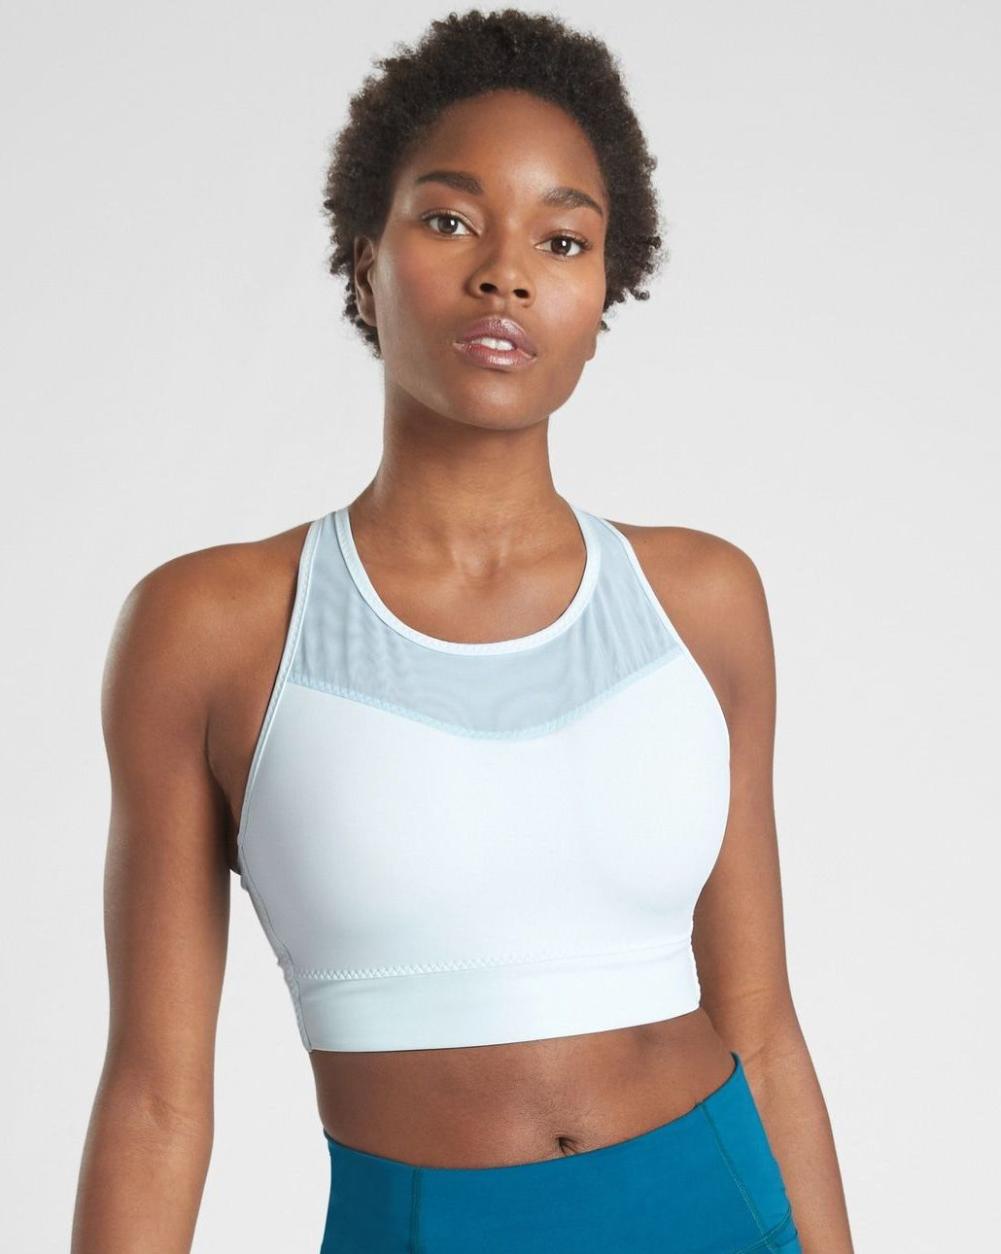 What Are the Different Styles of Sports Bras?